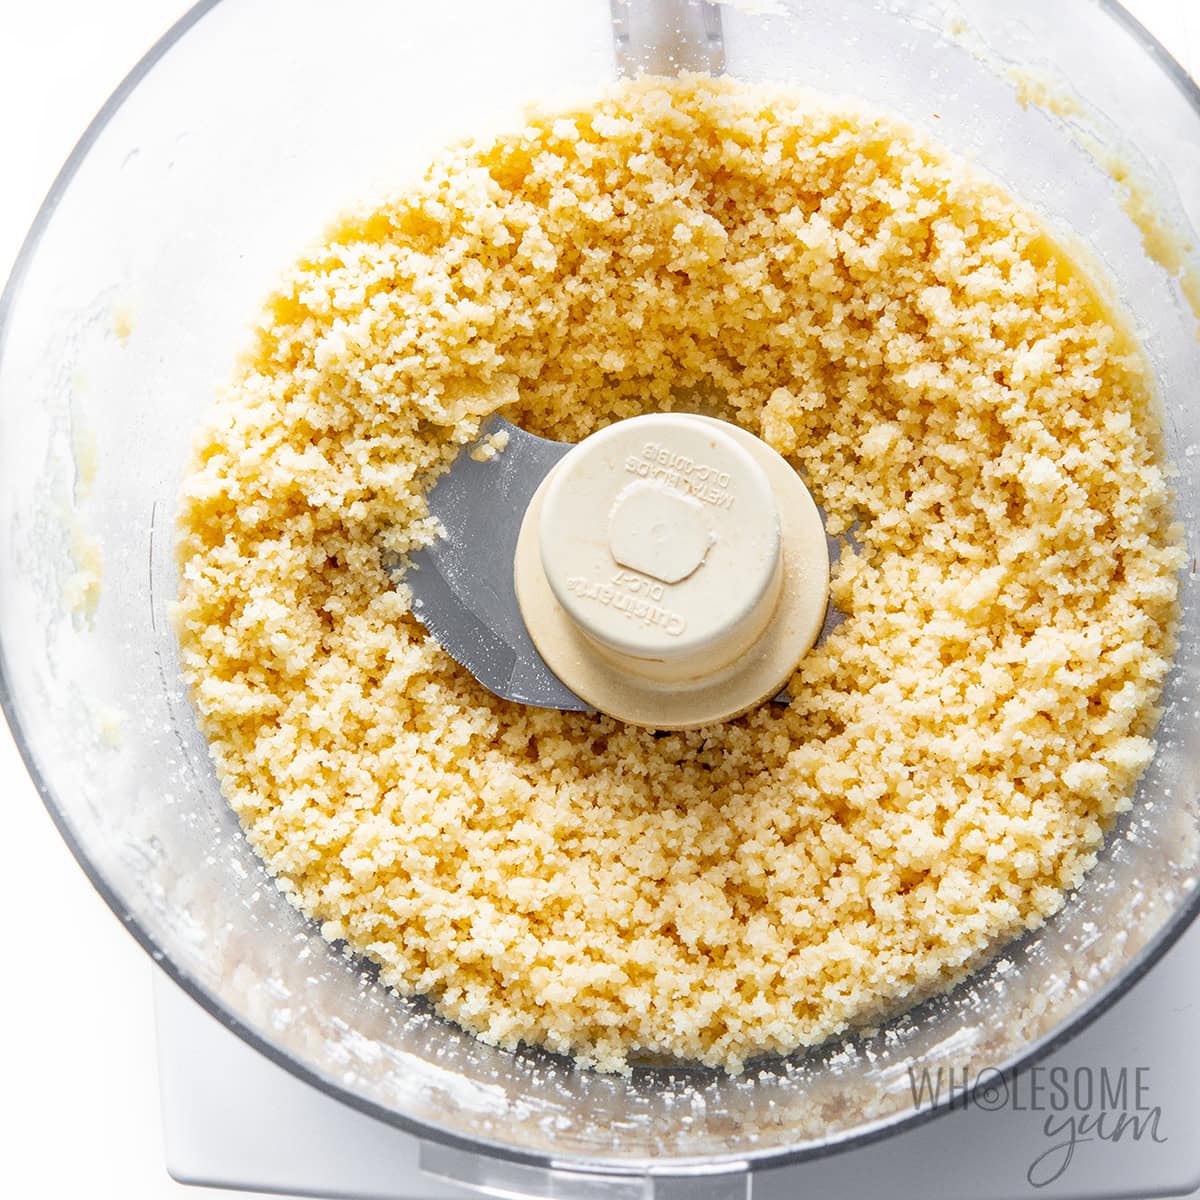 Dry ingredients mixed with melted butter in a food processor.